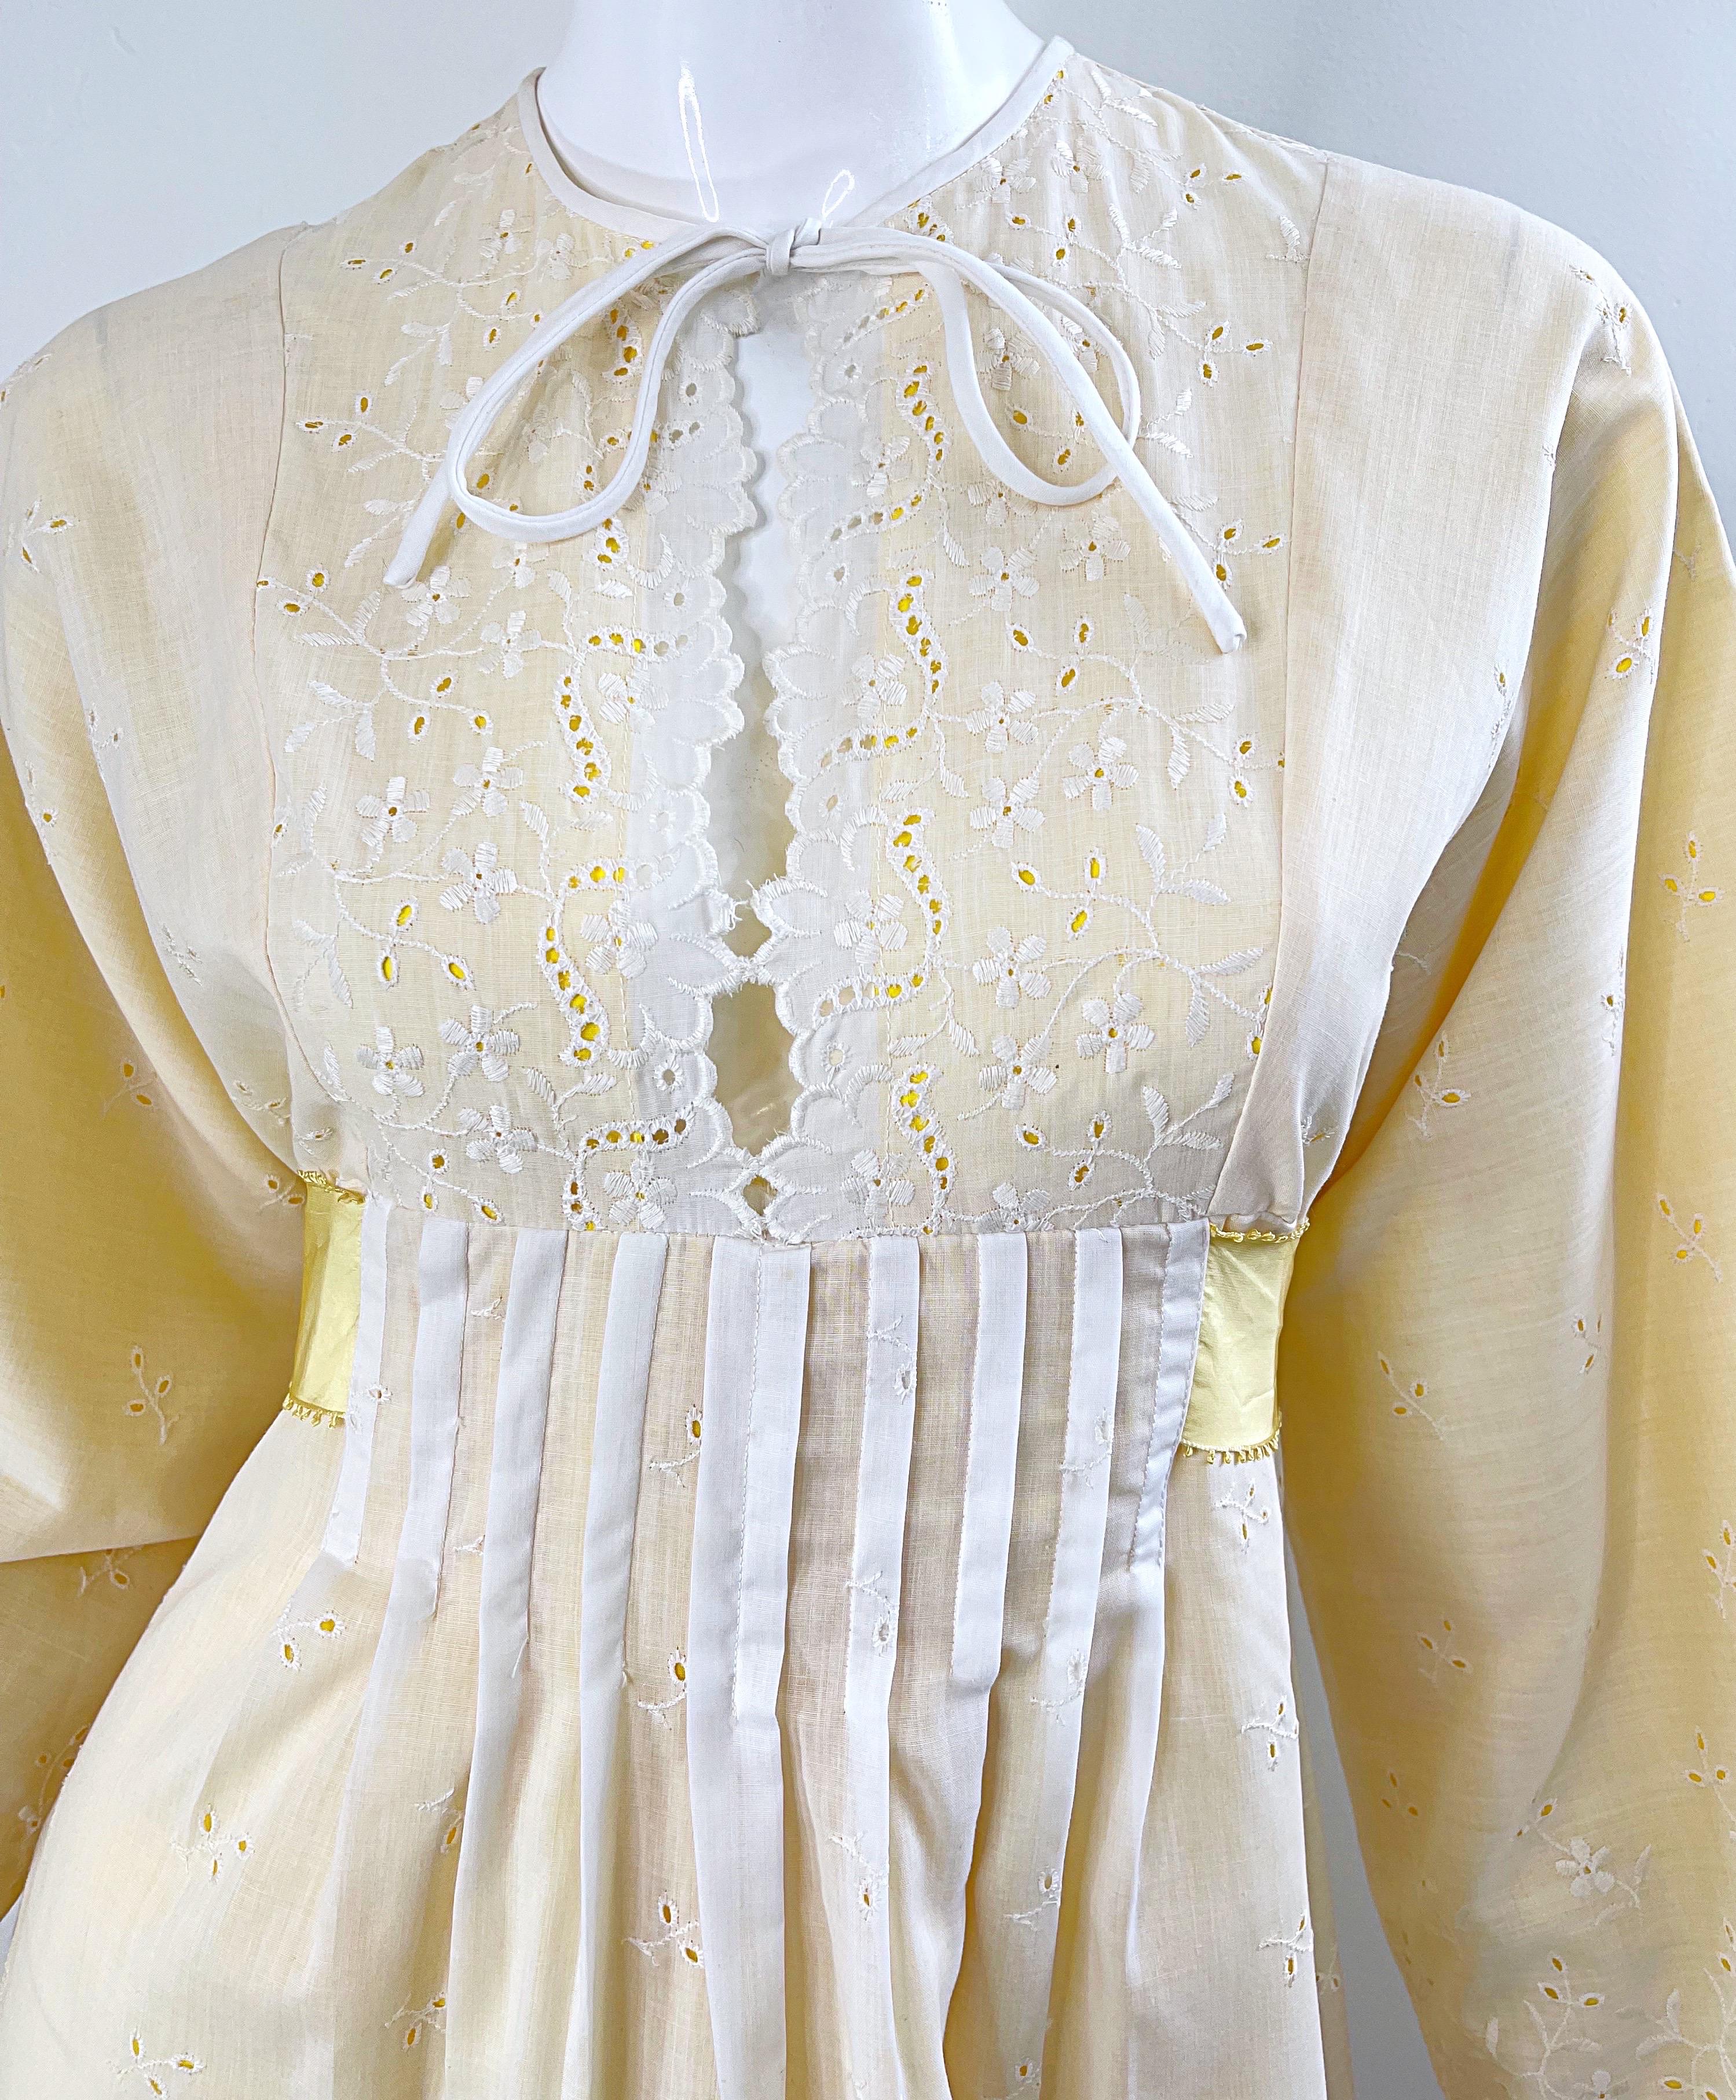 1970s Bill Tice Pale Yellow + White Cotton Eyelet Vintage 70s Maxi Dress In Excellent Condition For Sale In San Diego, CA